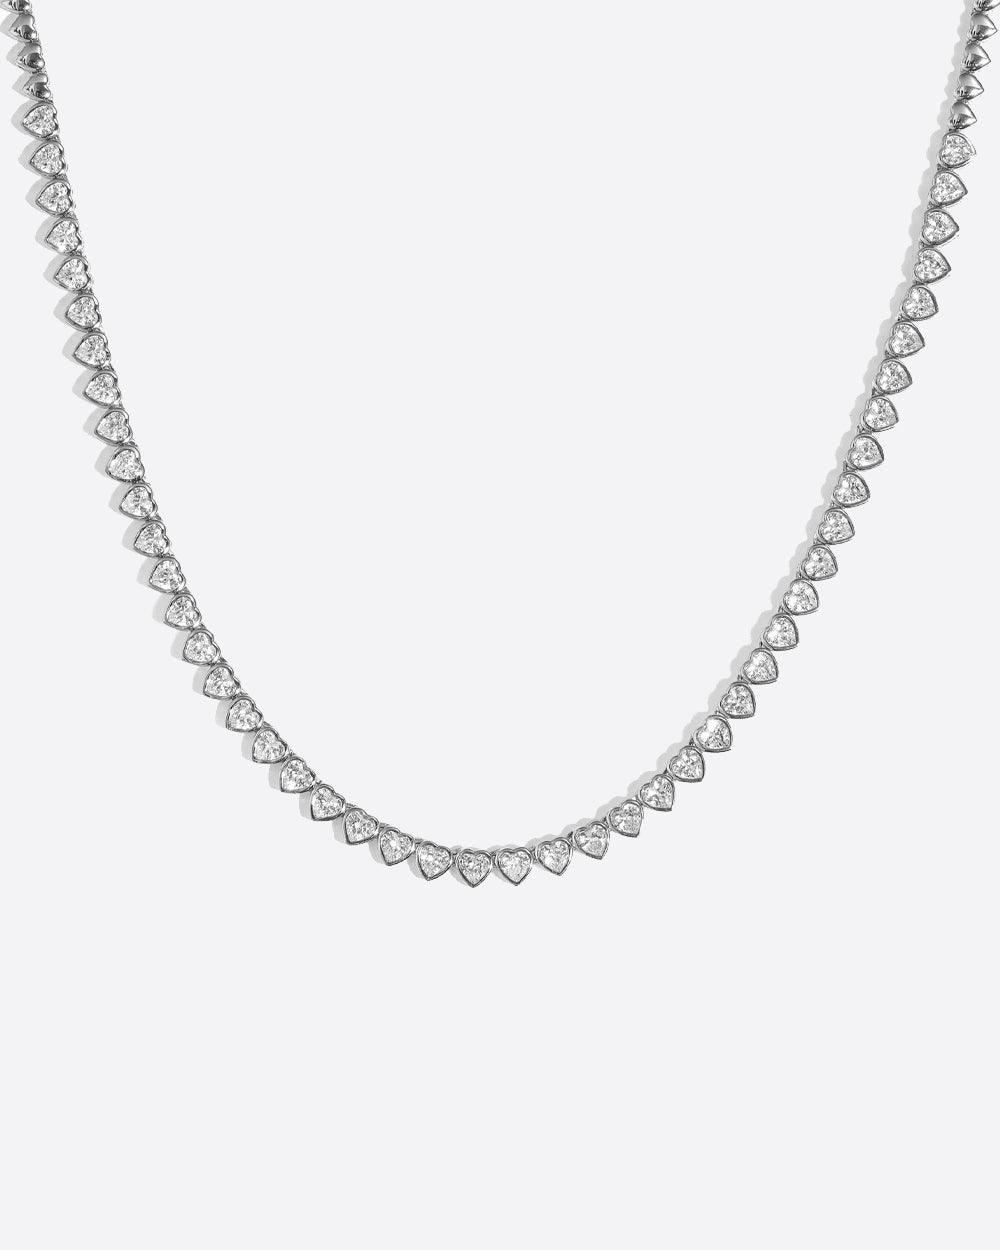 SPARKLING HEARTS NECKLACE. - 4MM WHITE GOLD - DRIP IN THE JEWEL